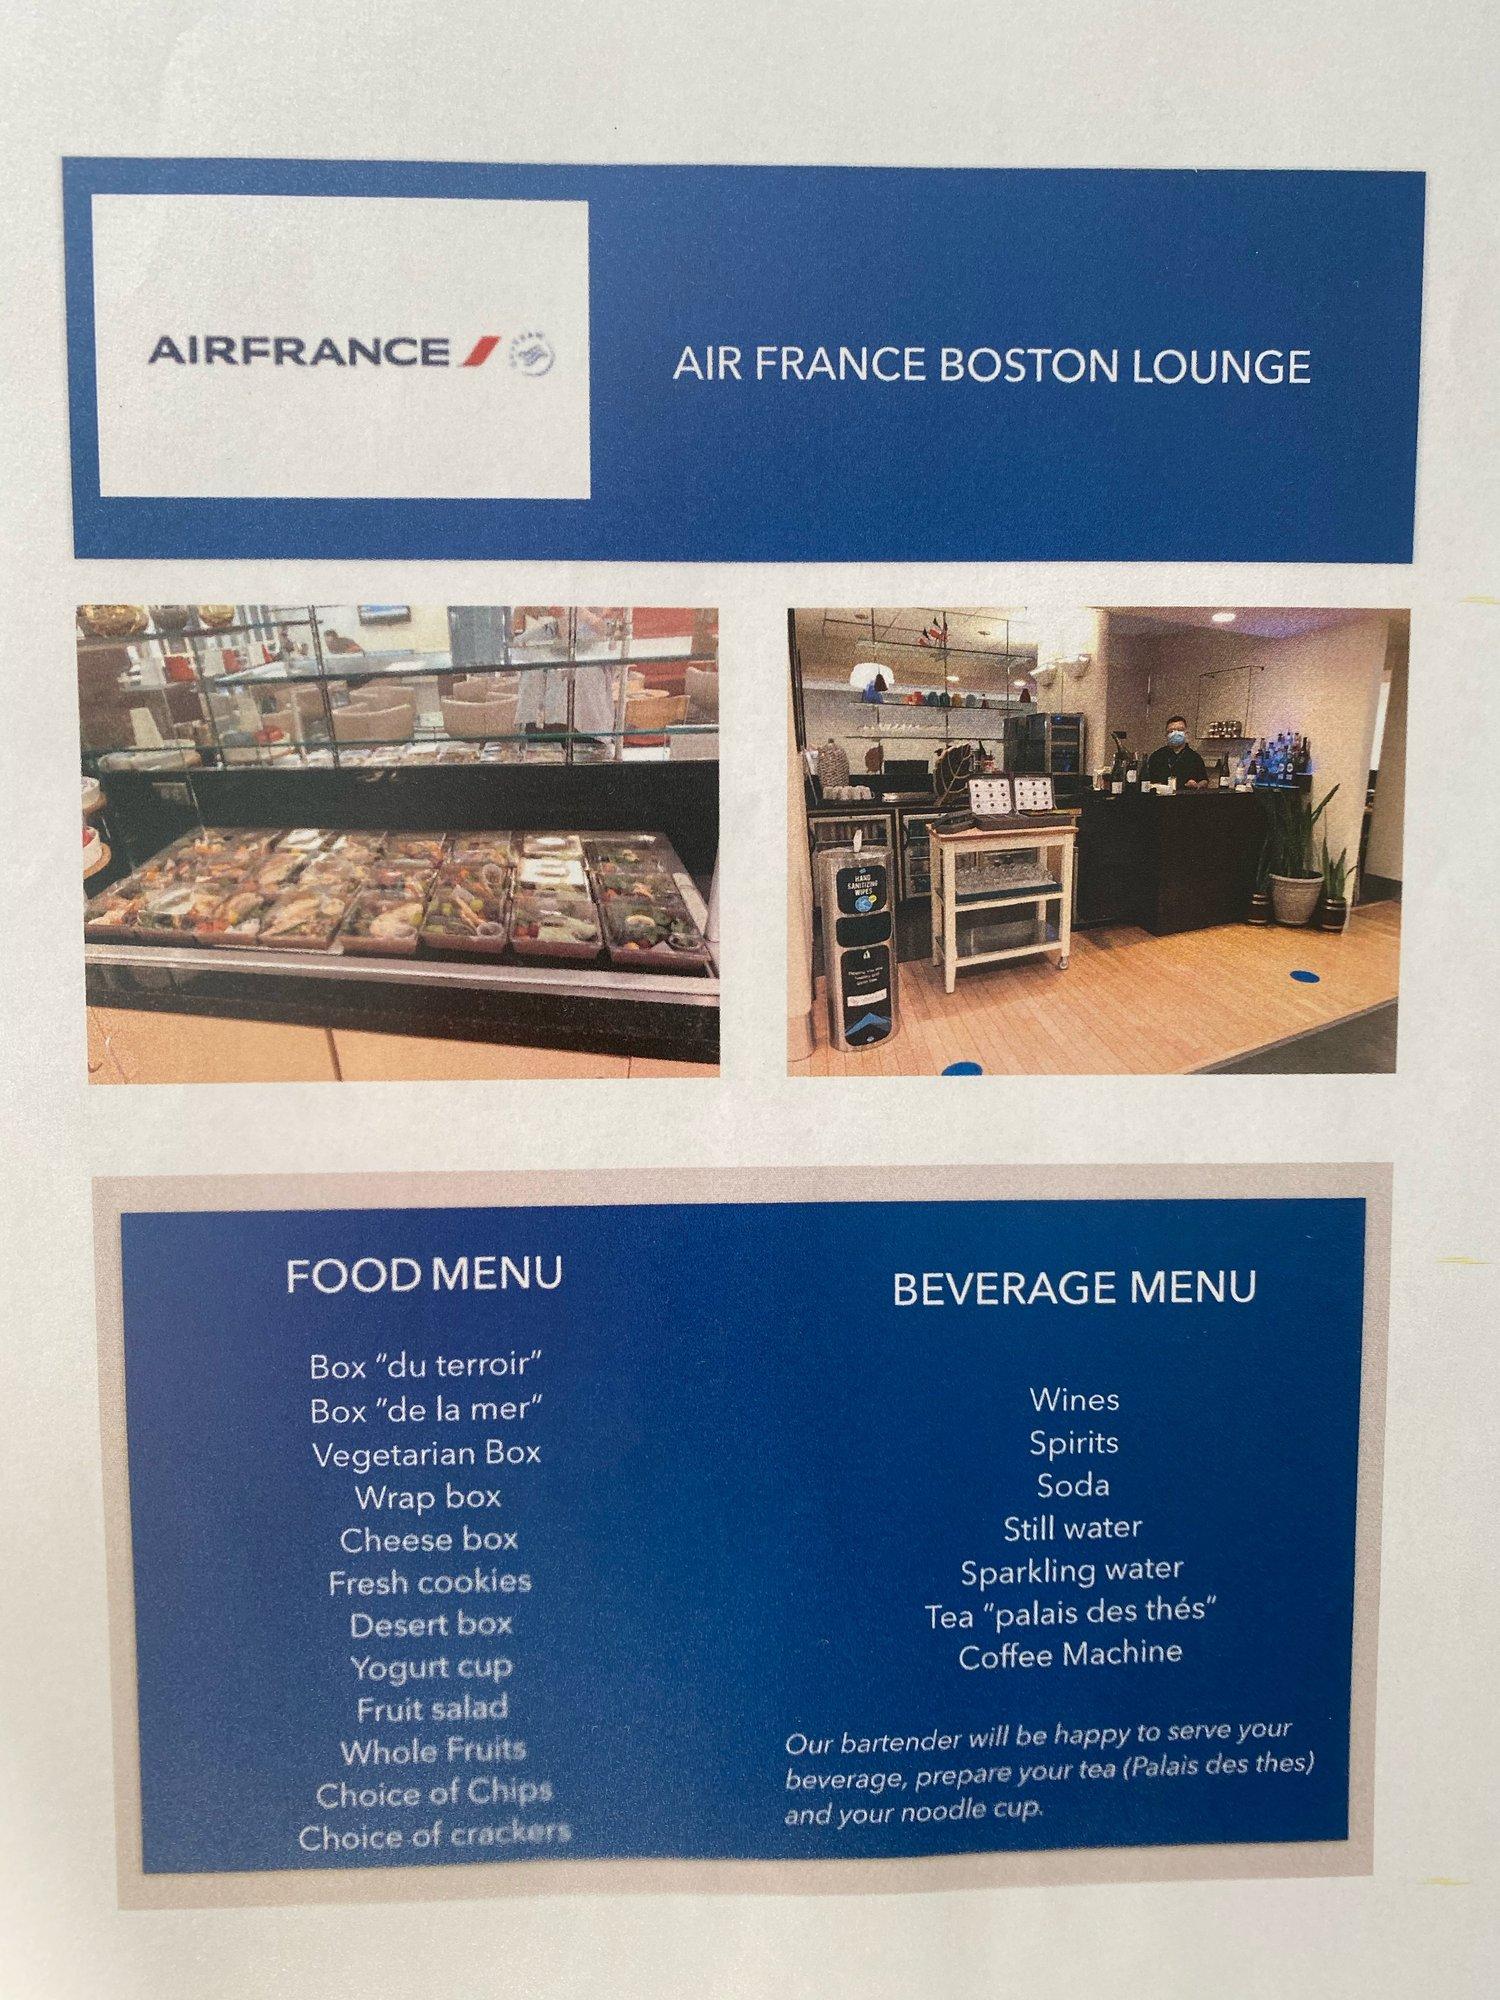 Air France Lounge image 25 of 26